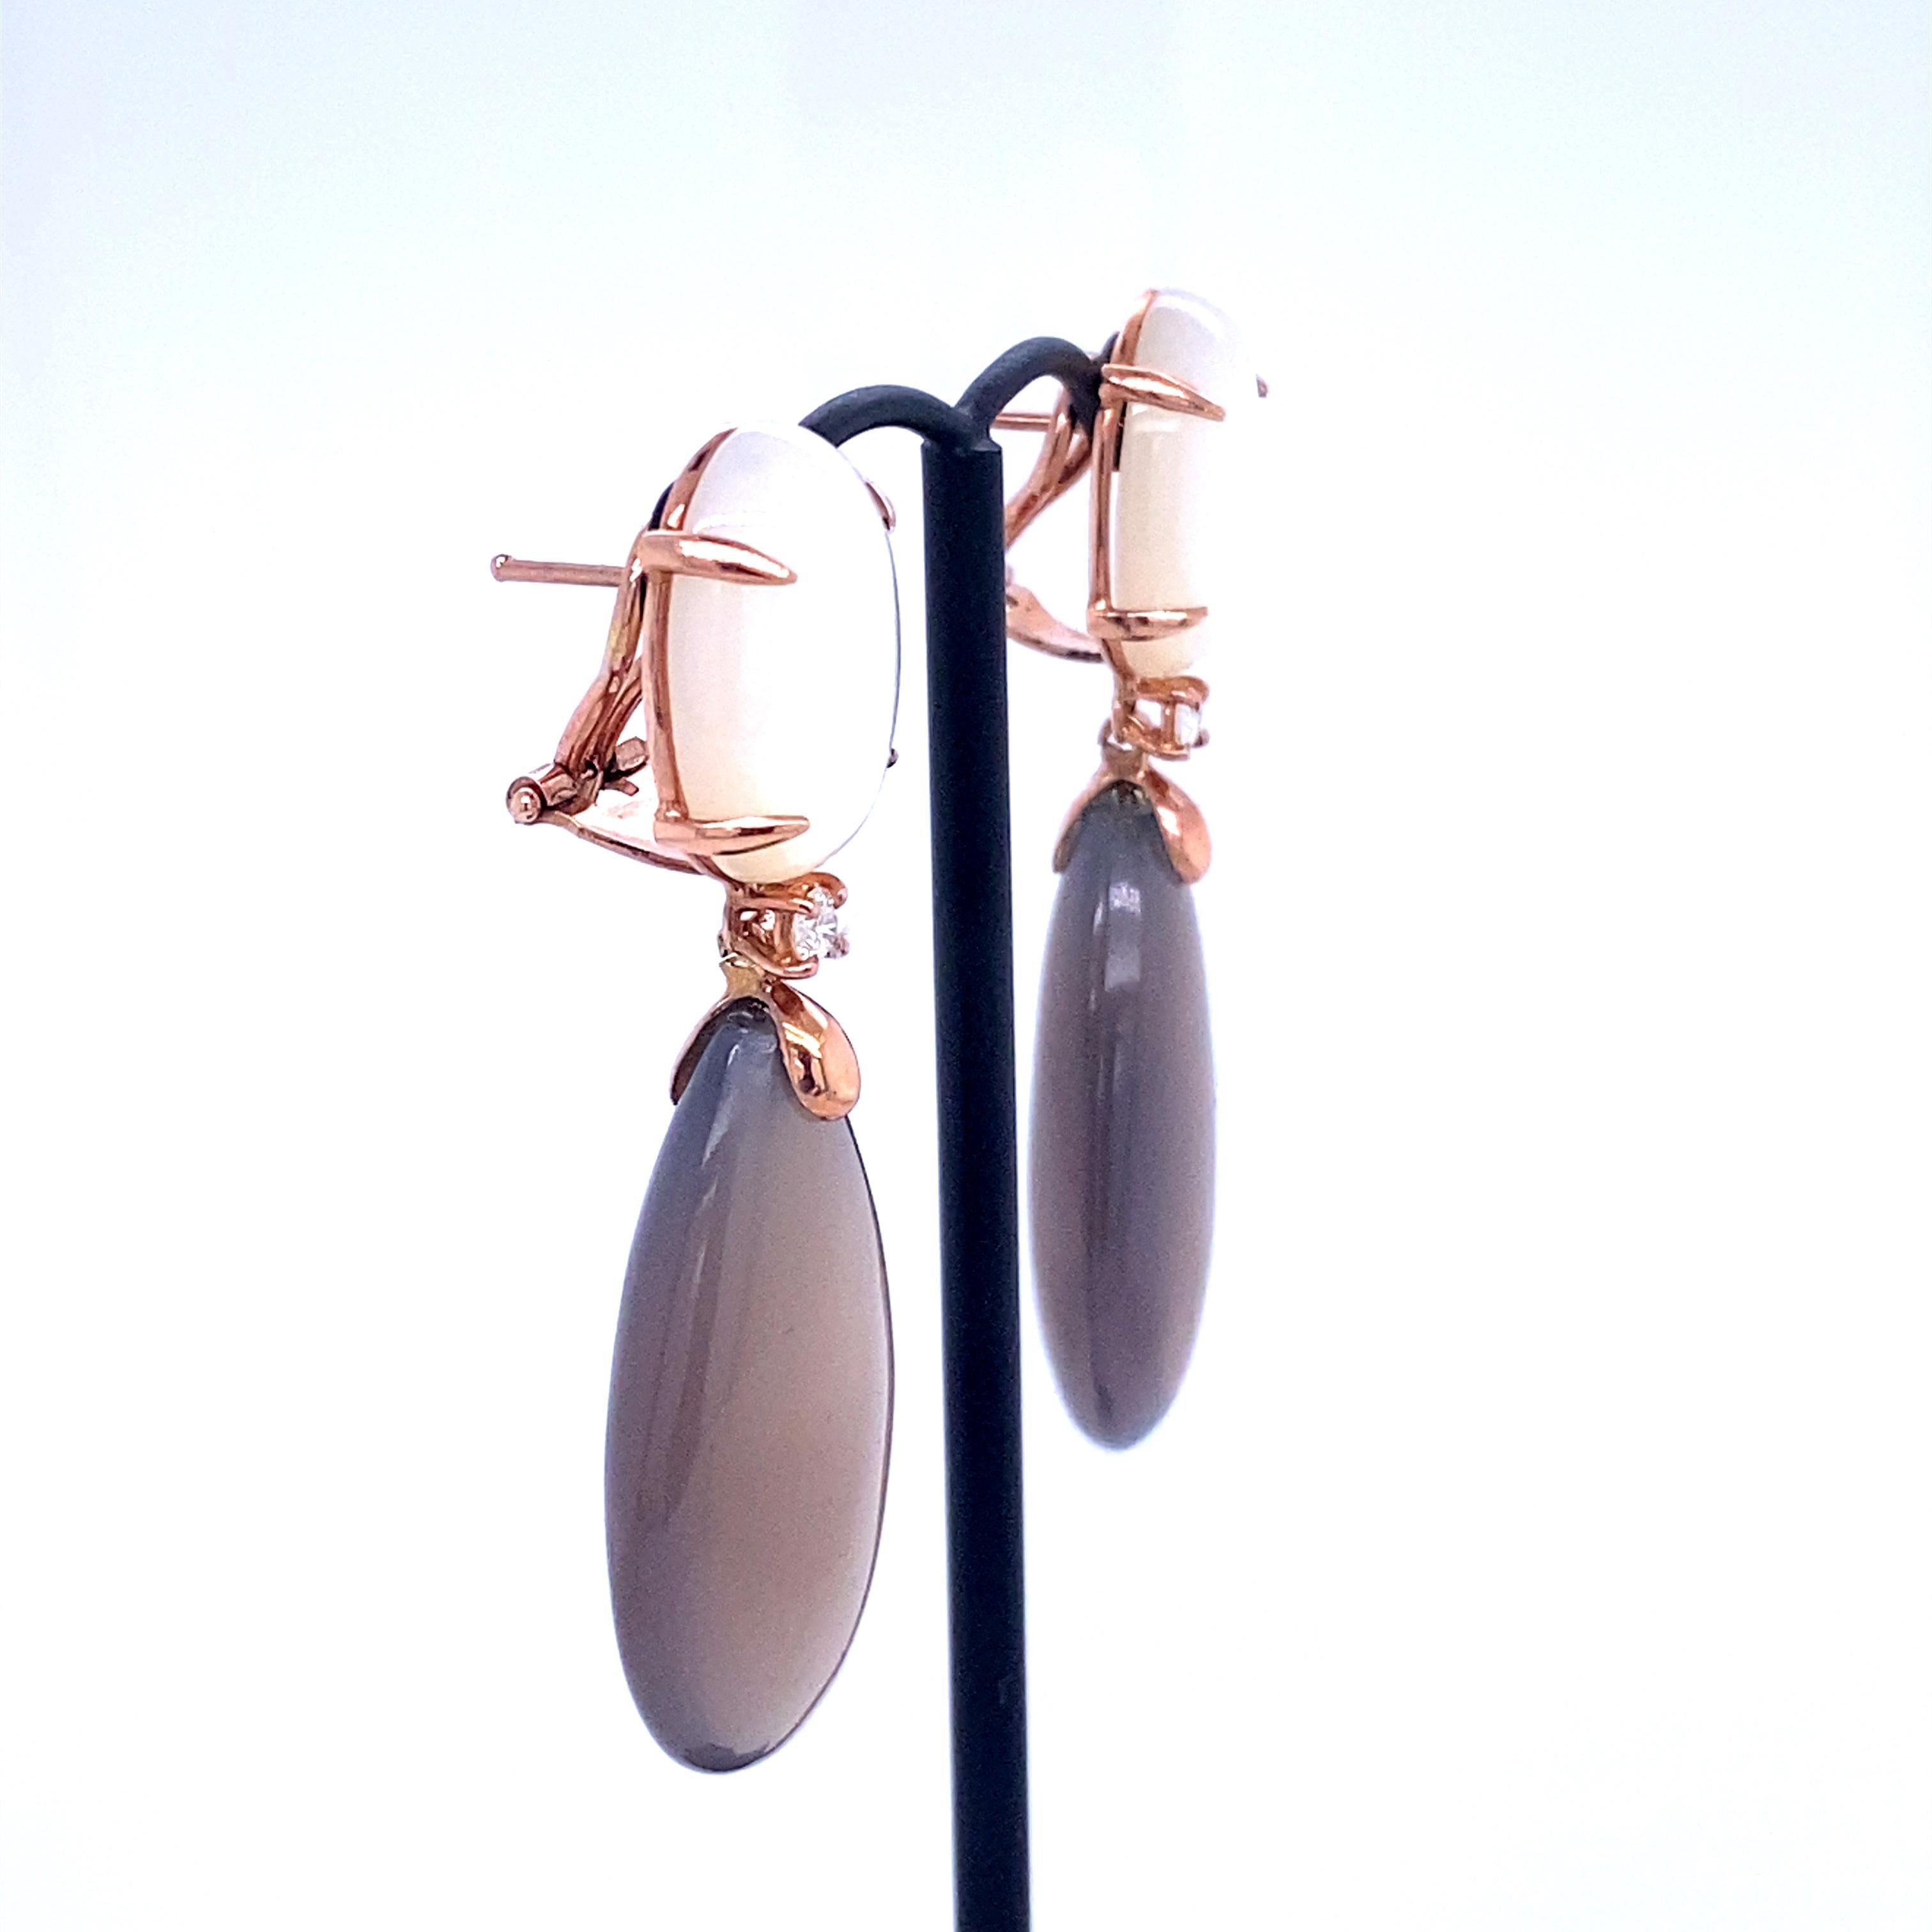 Mixed Cut Earrings in Pink Gold with Mother-of-Pearl, Diamonds 0.14 Carat and Gray Agate For Sale